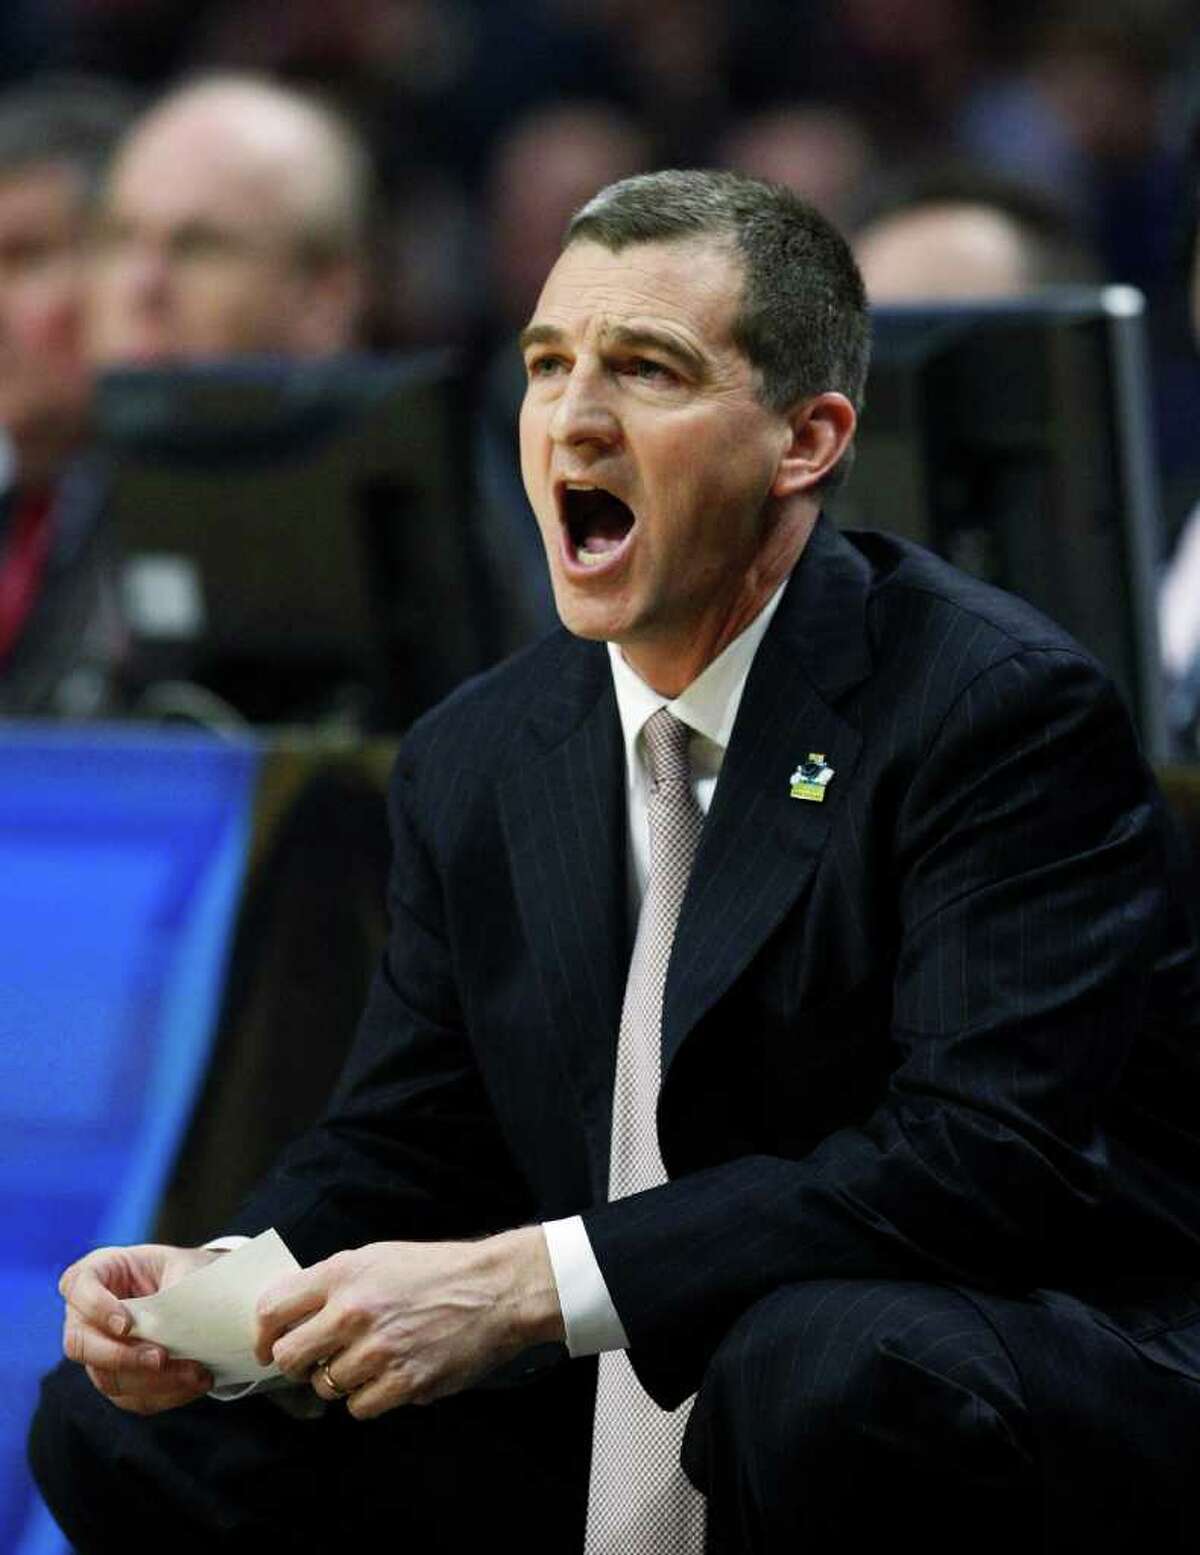 Texas A&M head coach Mark Turgeon yells out to his team in the first half of a second-round NCAA Southwest Regional tournament college basketball game in Chicago, Friday, March 18, 2011. Florida State won 57-50.